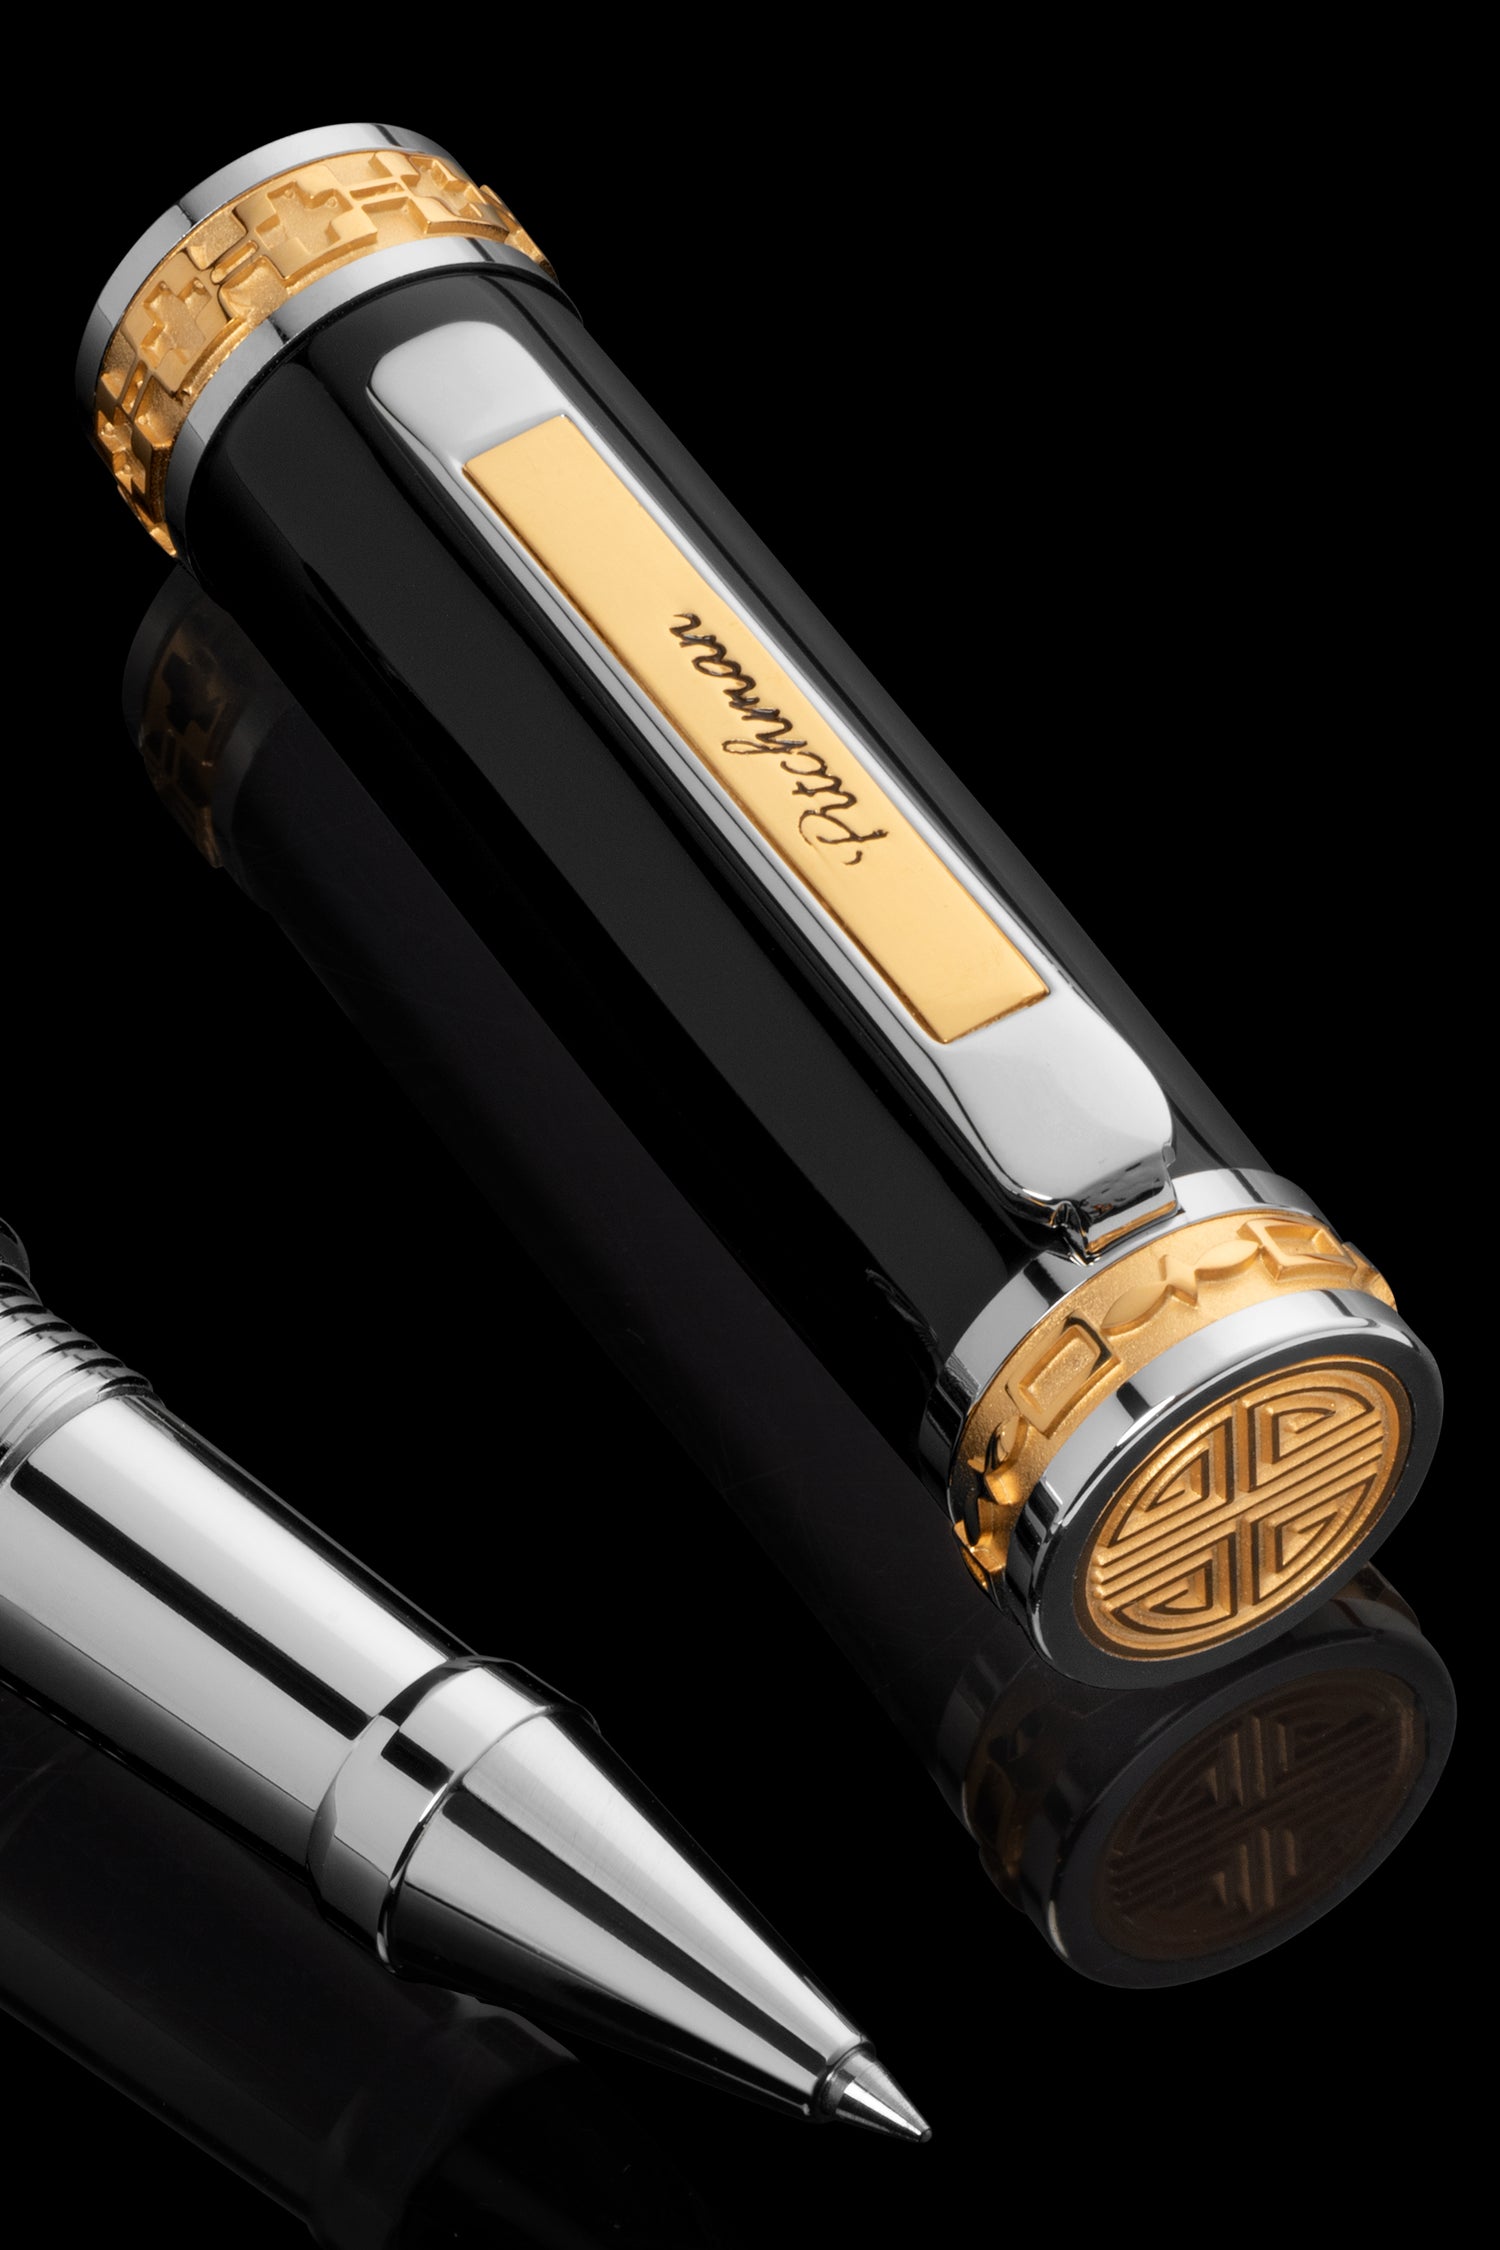 Pitchman Closer Luxury Rollerball Pen: Fancy, heavy, and fine. Ideal speaker gift, high-end rollerball pen